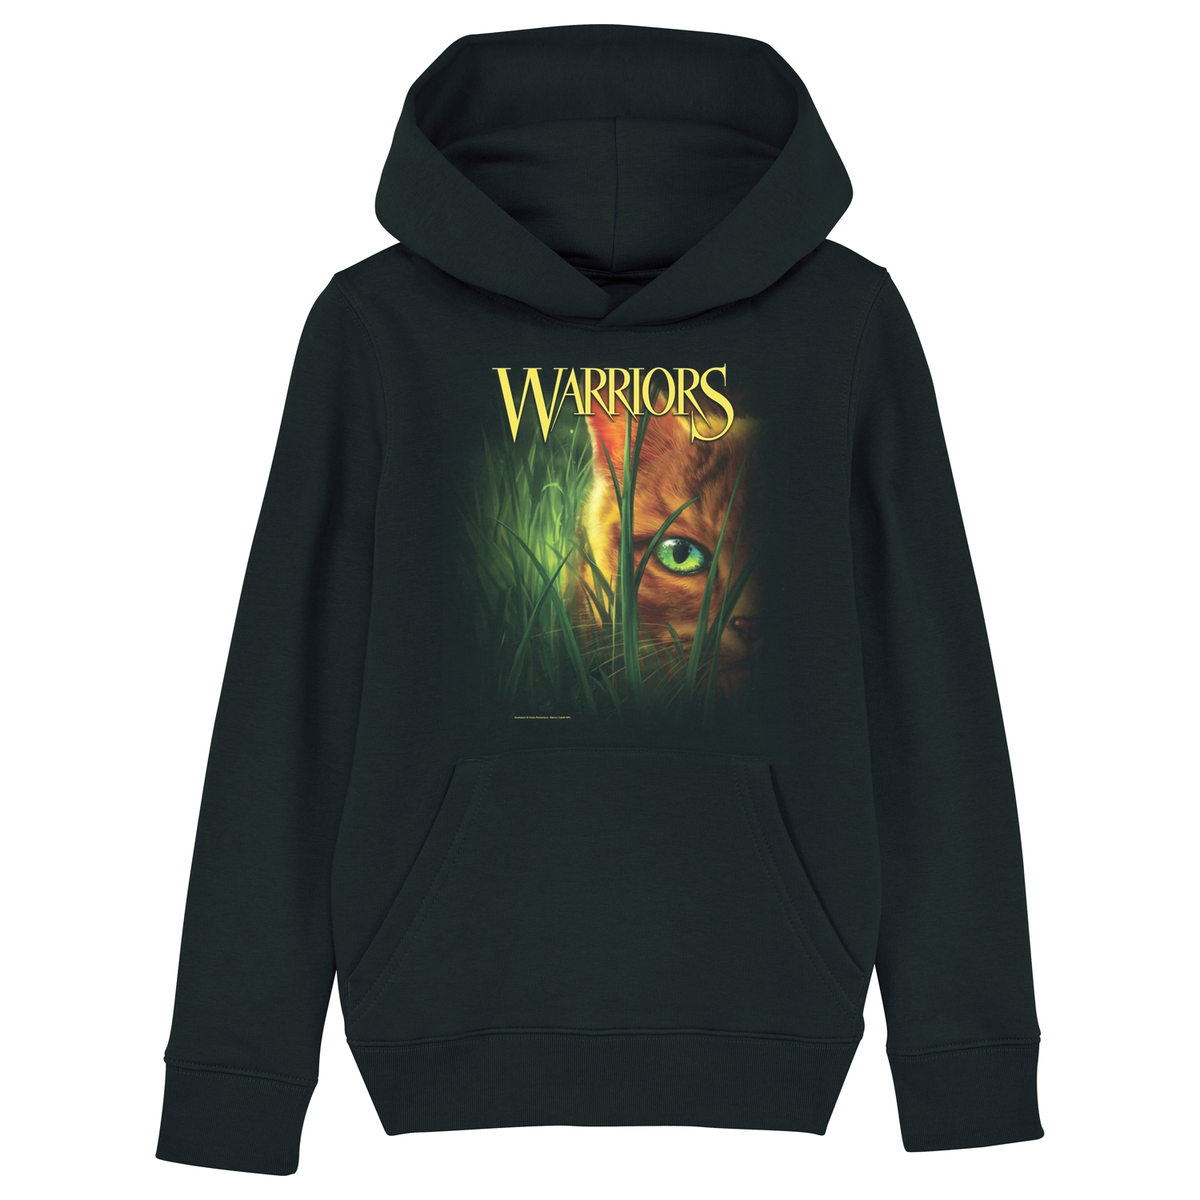 Into The Wild - Youth Unisex Hoodie